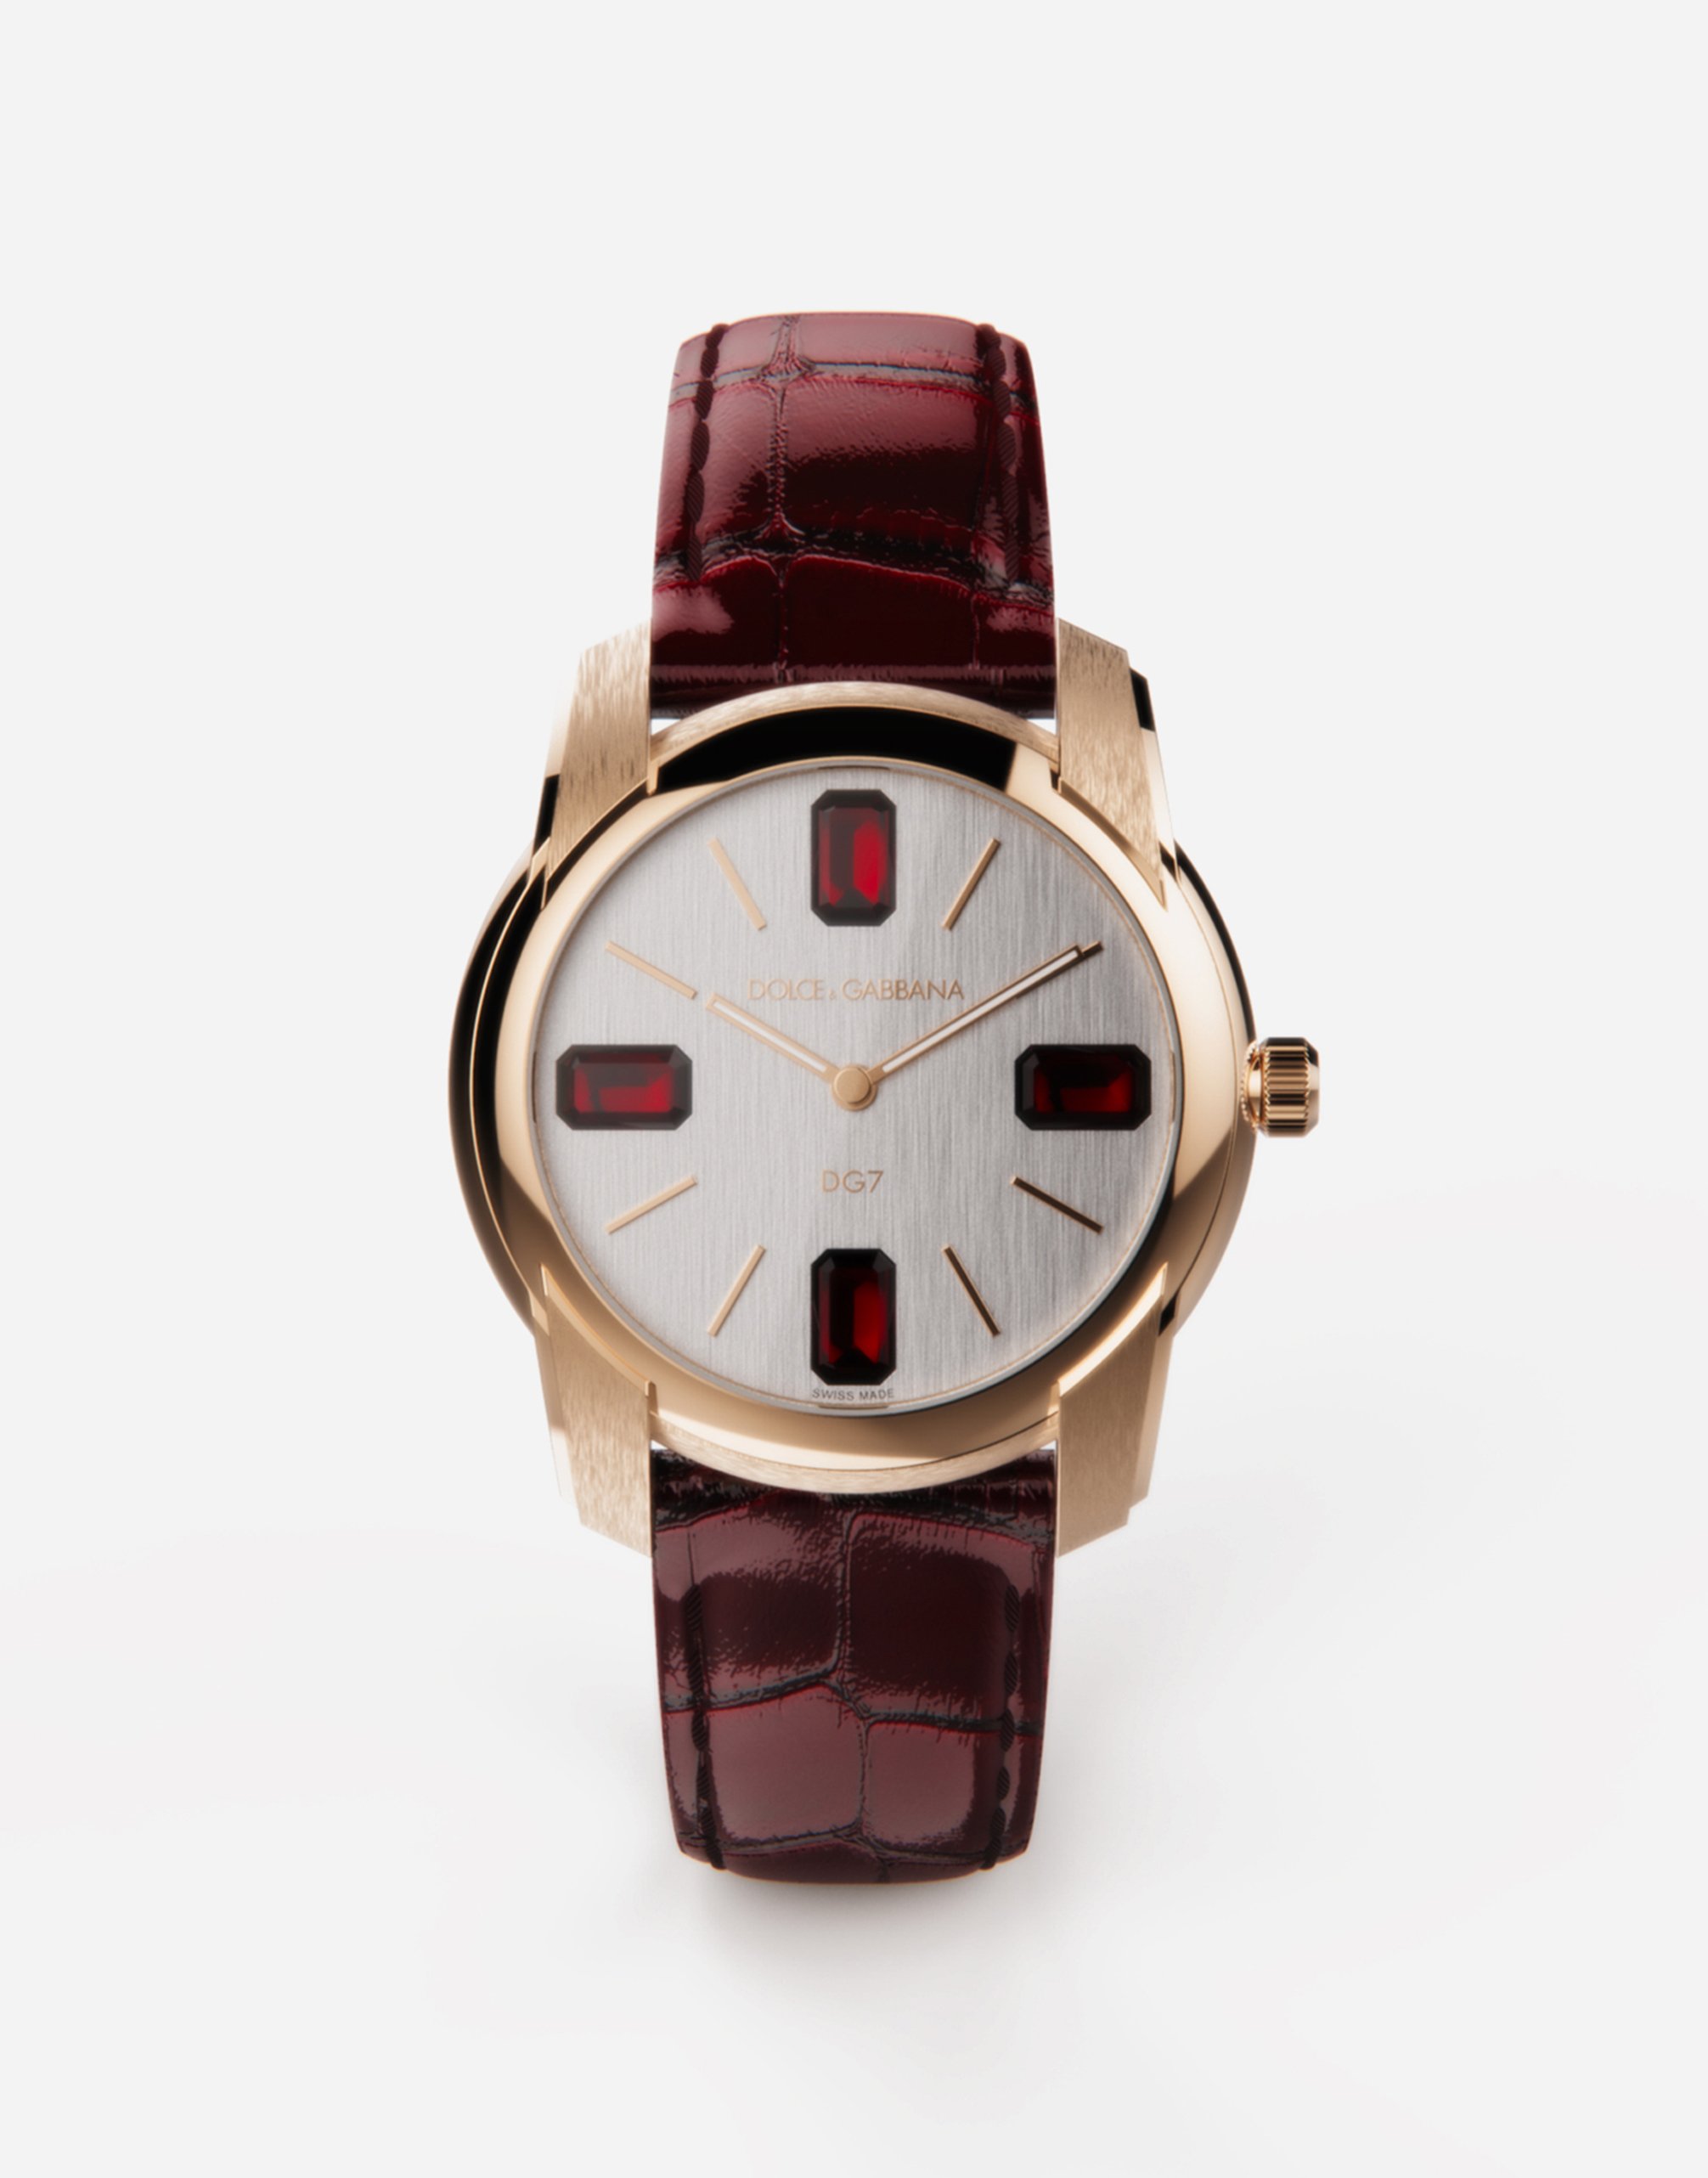 Gold watch with rubies in Bordeaux